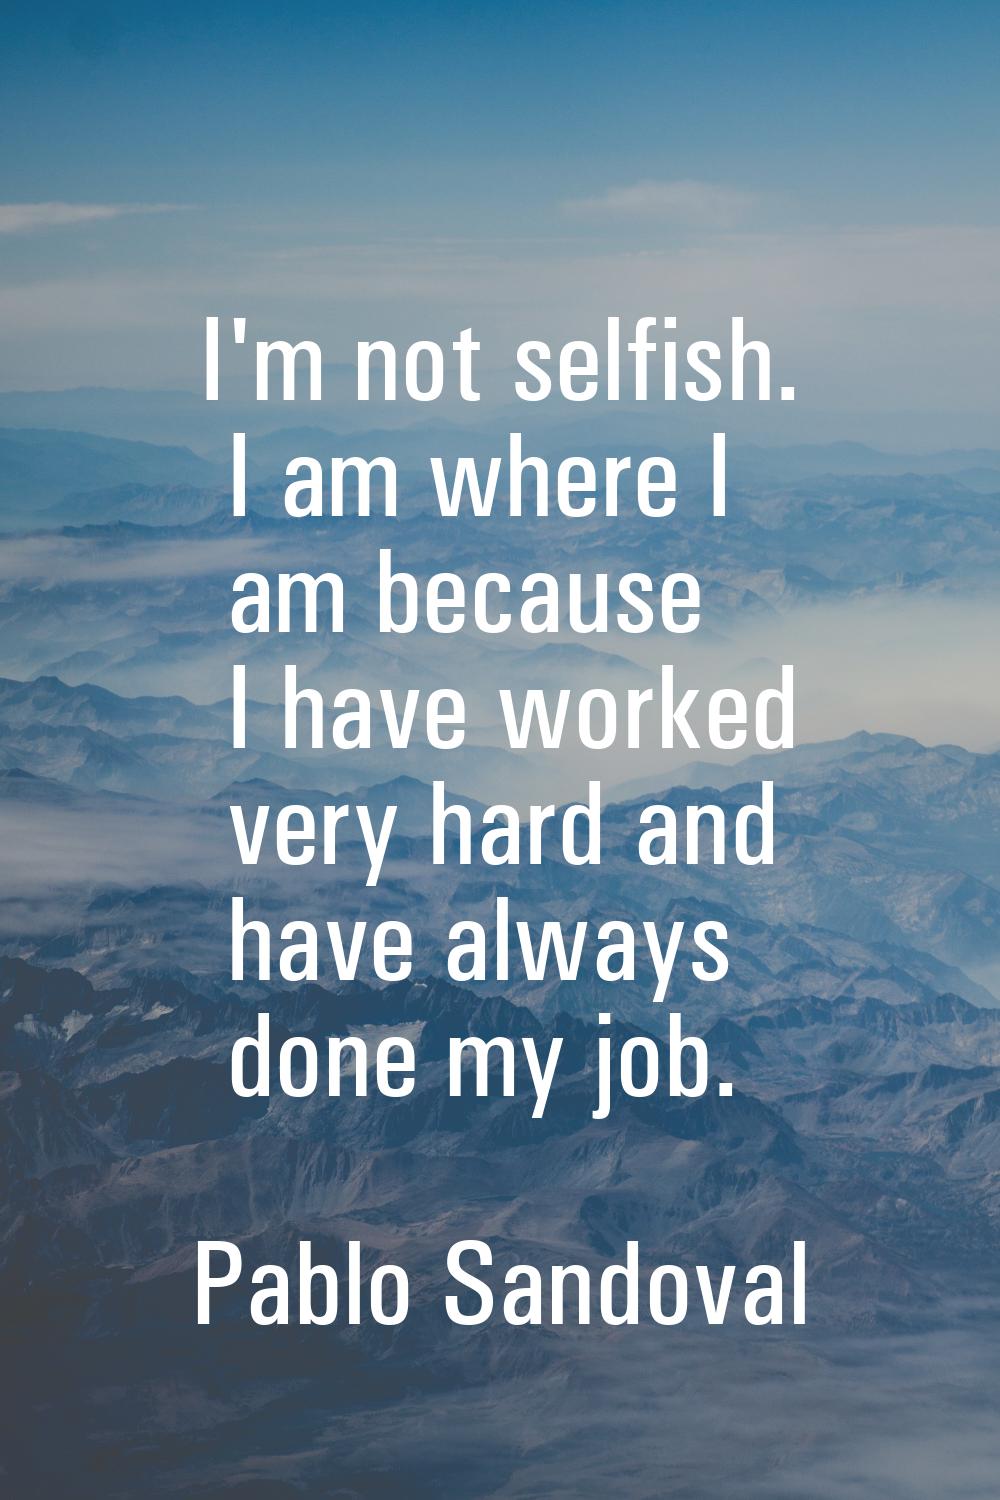 I'm not selfish. I am where I am because I have worked very hard and have always done my job.